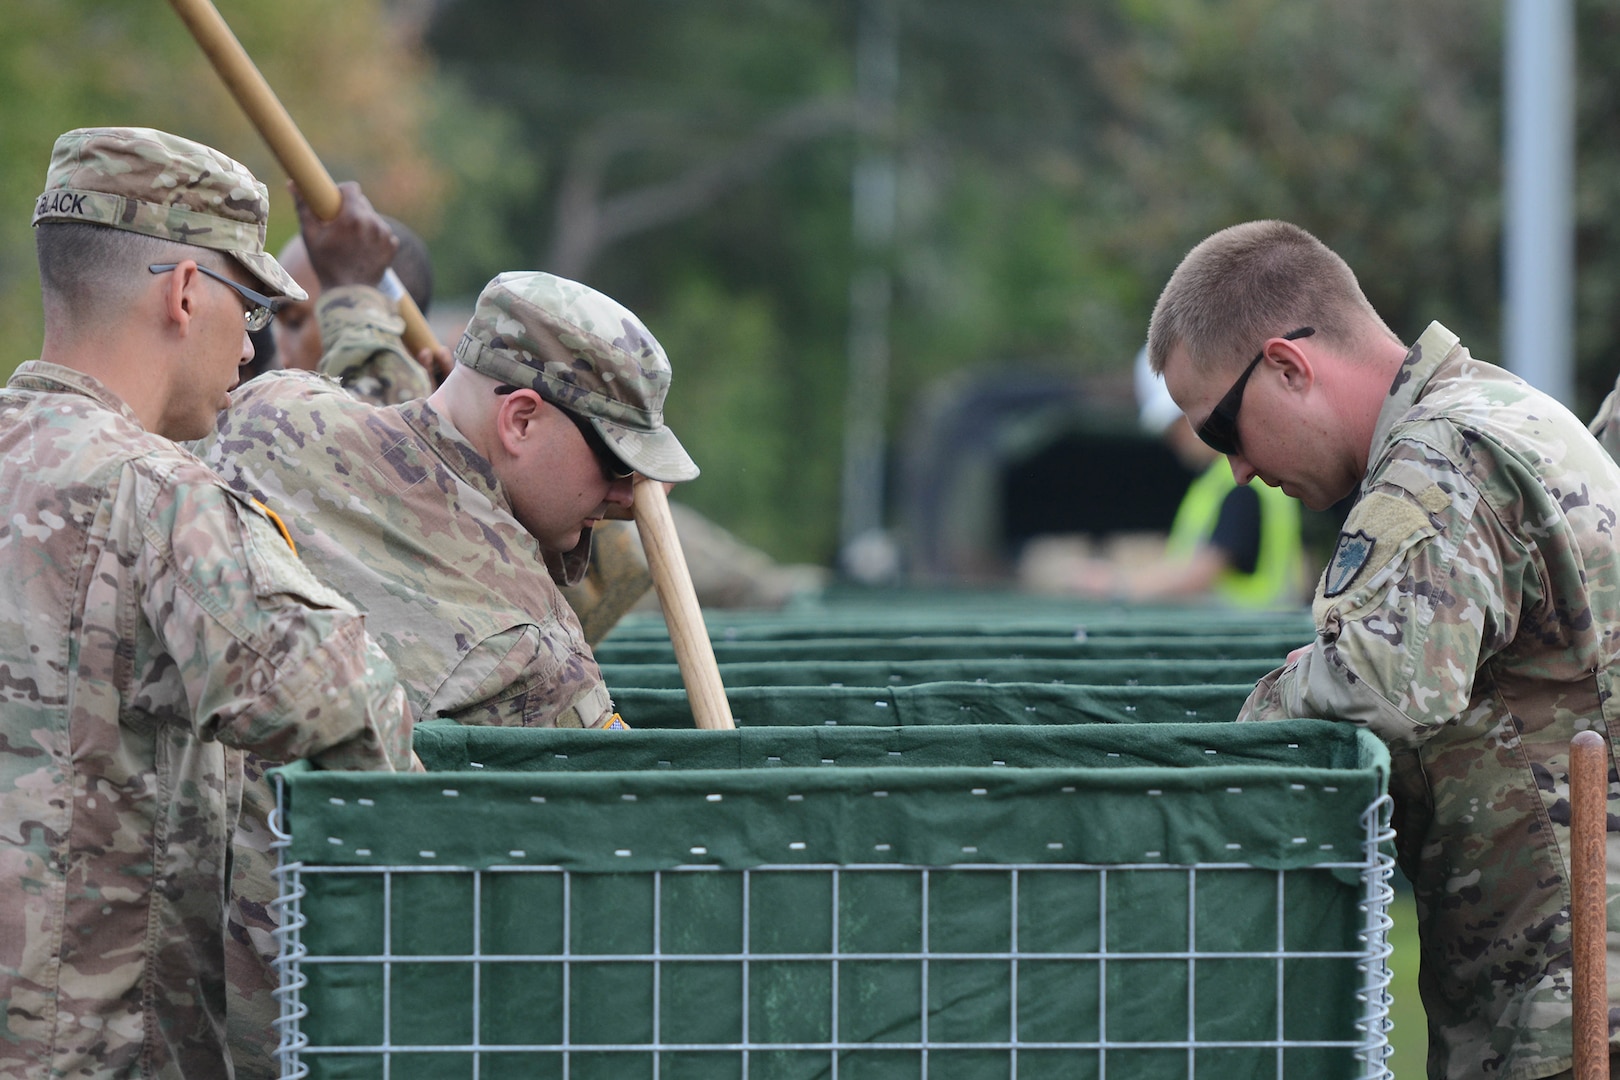 Sgt. Cody Puckett, 1226th Engineering Company training NCO and heavy equipment leader, fills a HESCO water barrier with dirt outside the Tidelands Health Georgetown Memorial Hospital in Georgetown, South Carolina, on Sept. 25, 2018. Approximately 2,000 South Carolina National Guard Soldiers and Airmen are on duty to support local authorities in response and recovery operations to the ongoing flooding that followed Hurricane Florence's landfall. National Guard Soldiers and Airmen from Alaska, Arkansas, Georgia, Maryland, New York, Tennessee, Virginia and Wisconsin are also supporting the South Carolina National Guard recovery efforts.